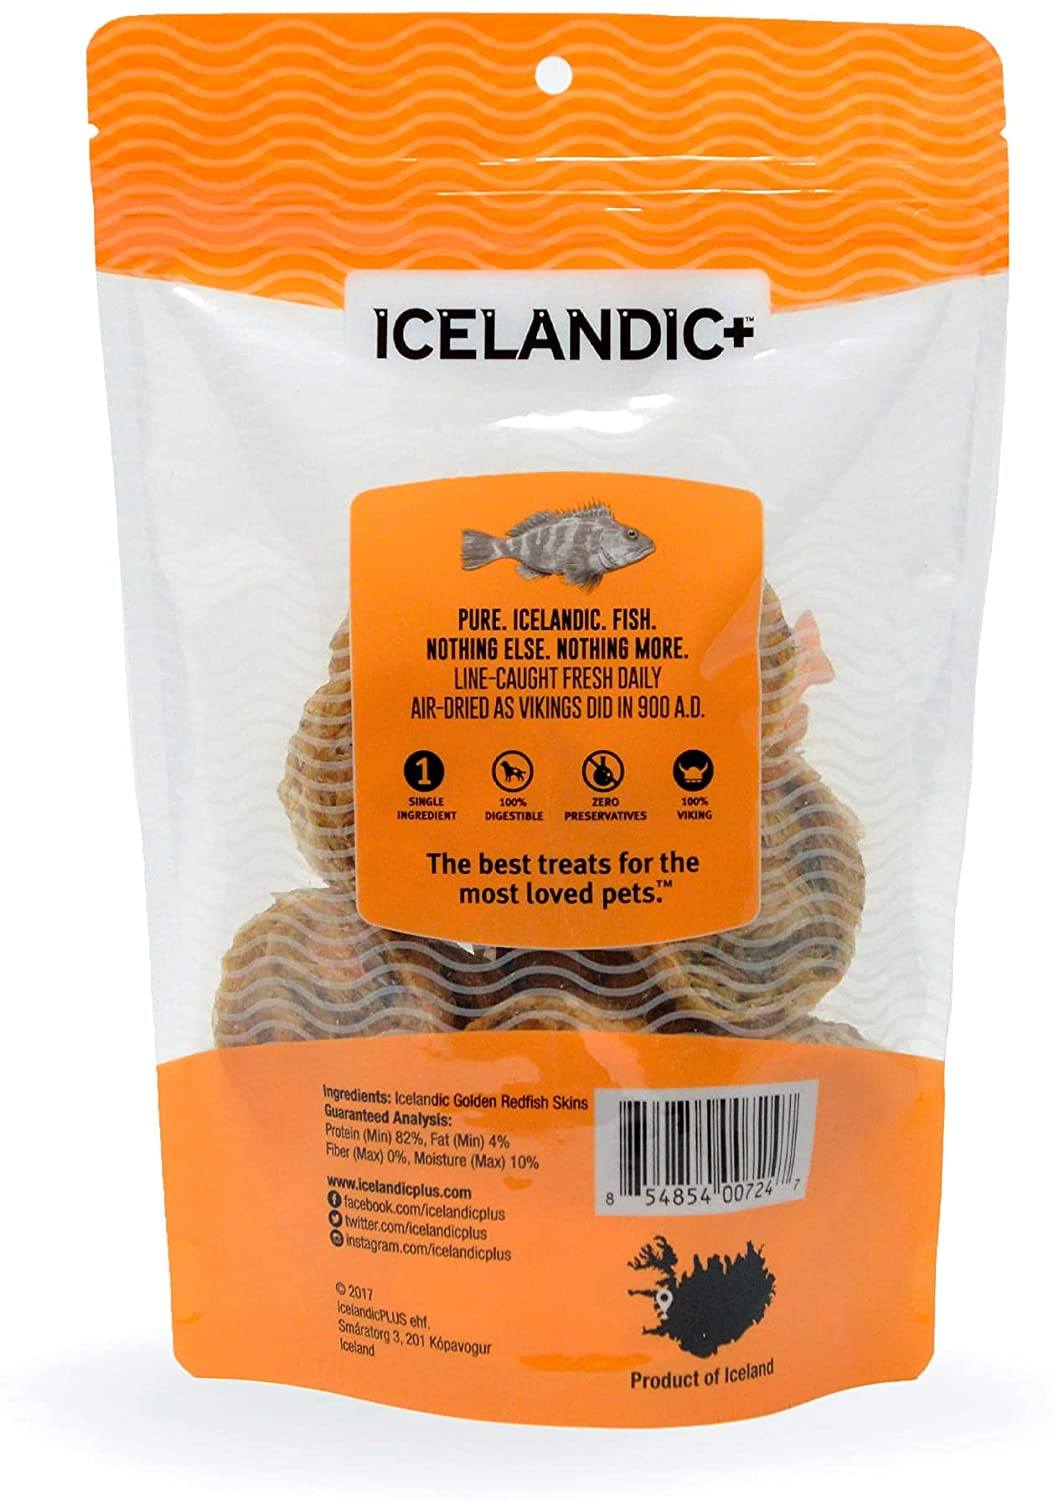 Icelandic+ Redfish Skin Rolls Natural Dehydrated Cat and Dog Treats - 3 oz  